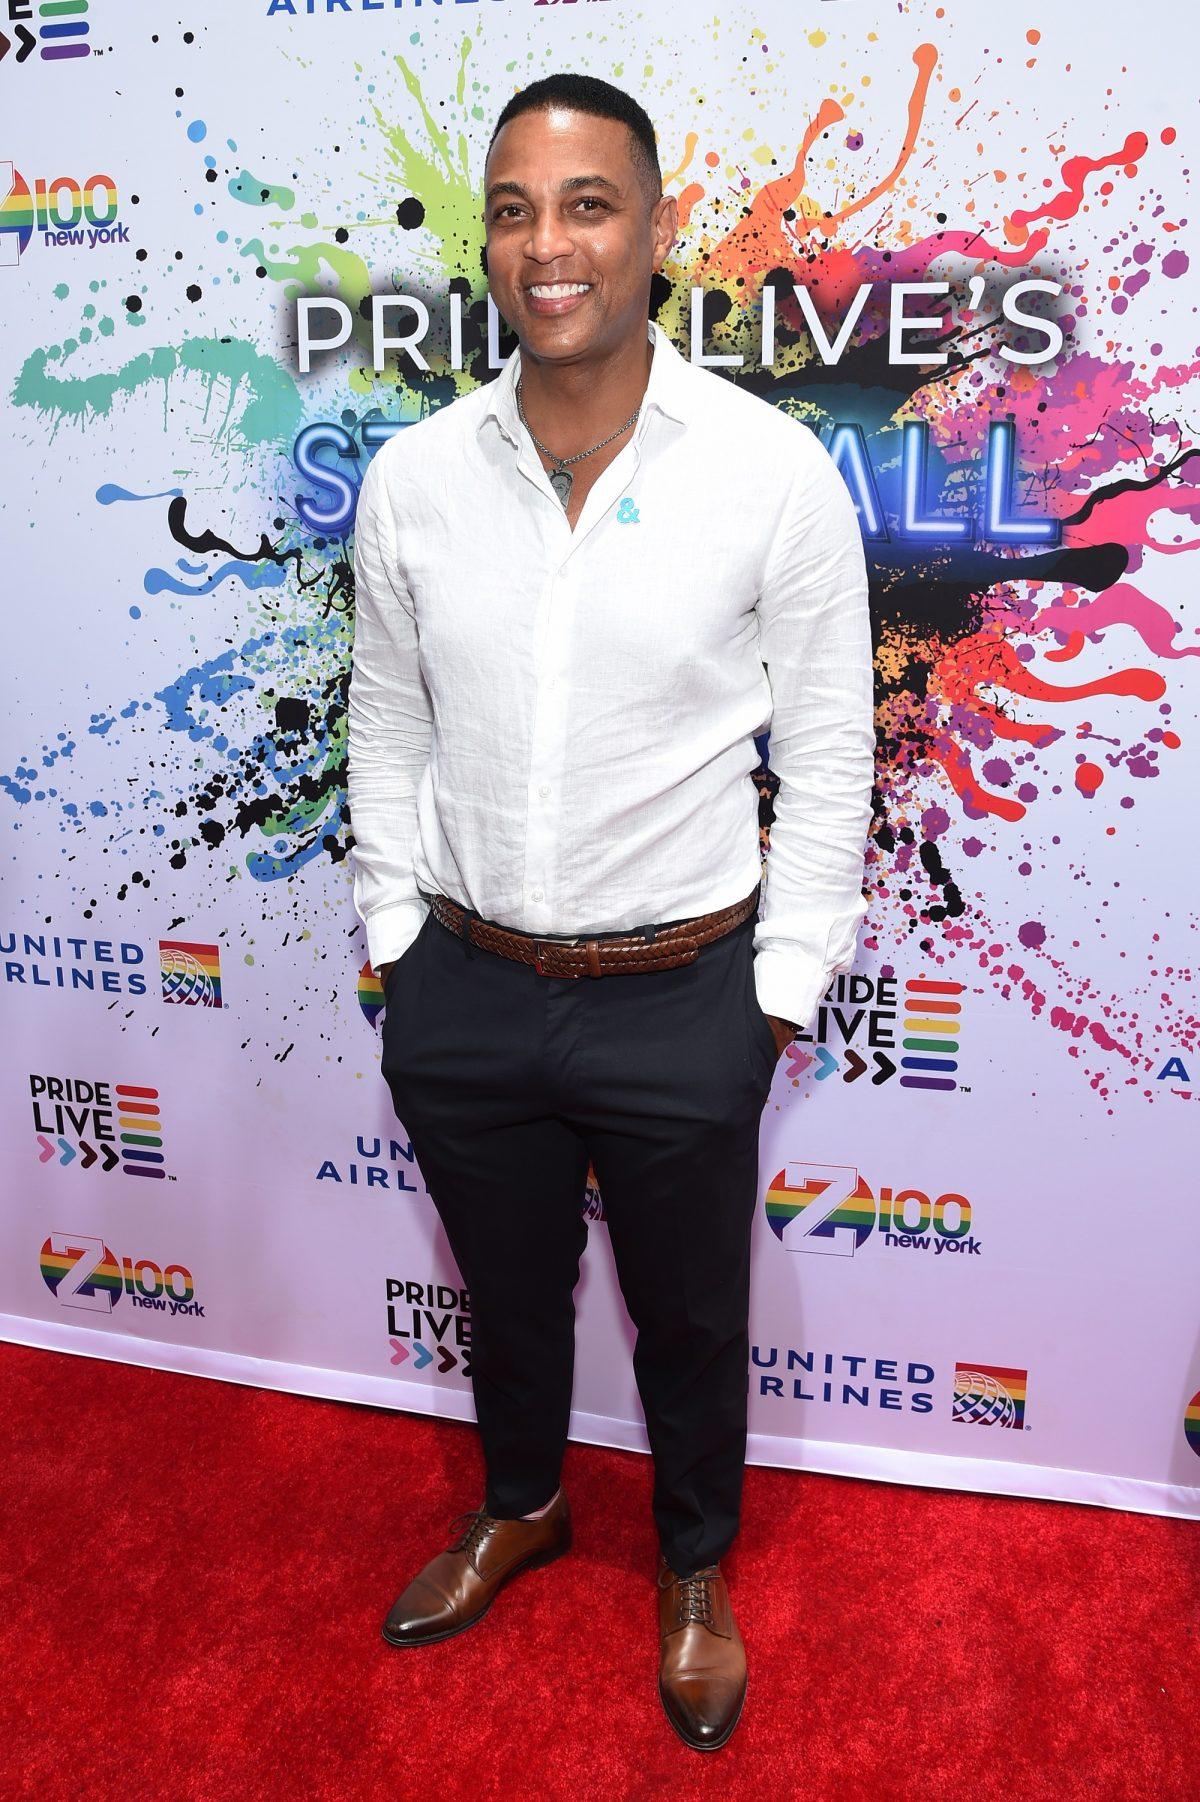 Don Lemon attends Pride Live's 2019 Stonewall Day on June 28, 2019 in New York City. (Photo by Jamie McCarthy/Getty Images)